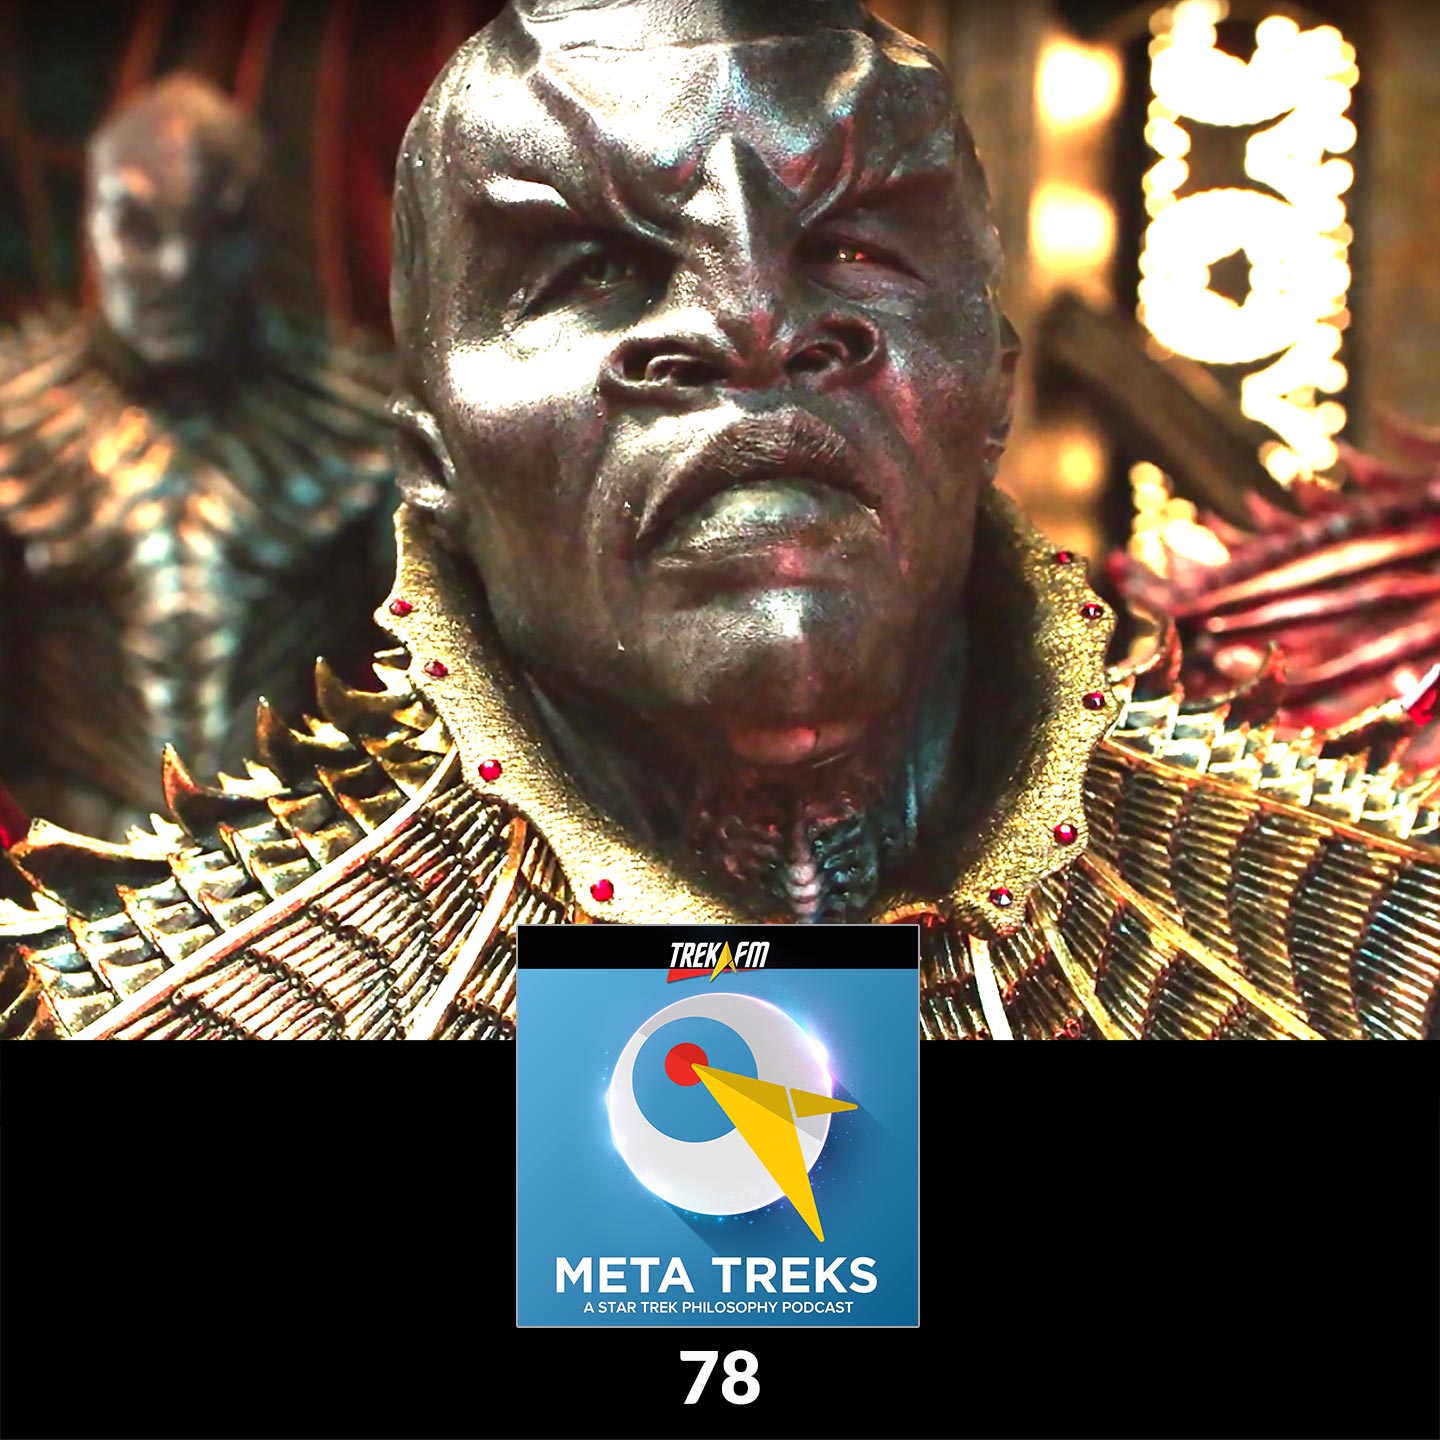 Meta Treks 78: How Do You Say 'Wall' in Klingon? - Philosophical Themes in Star Trek: Discovery, Episodes 1 and 2.